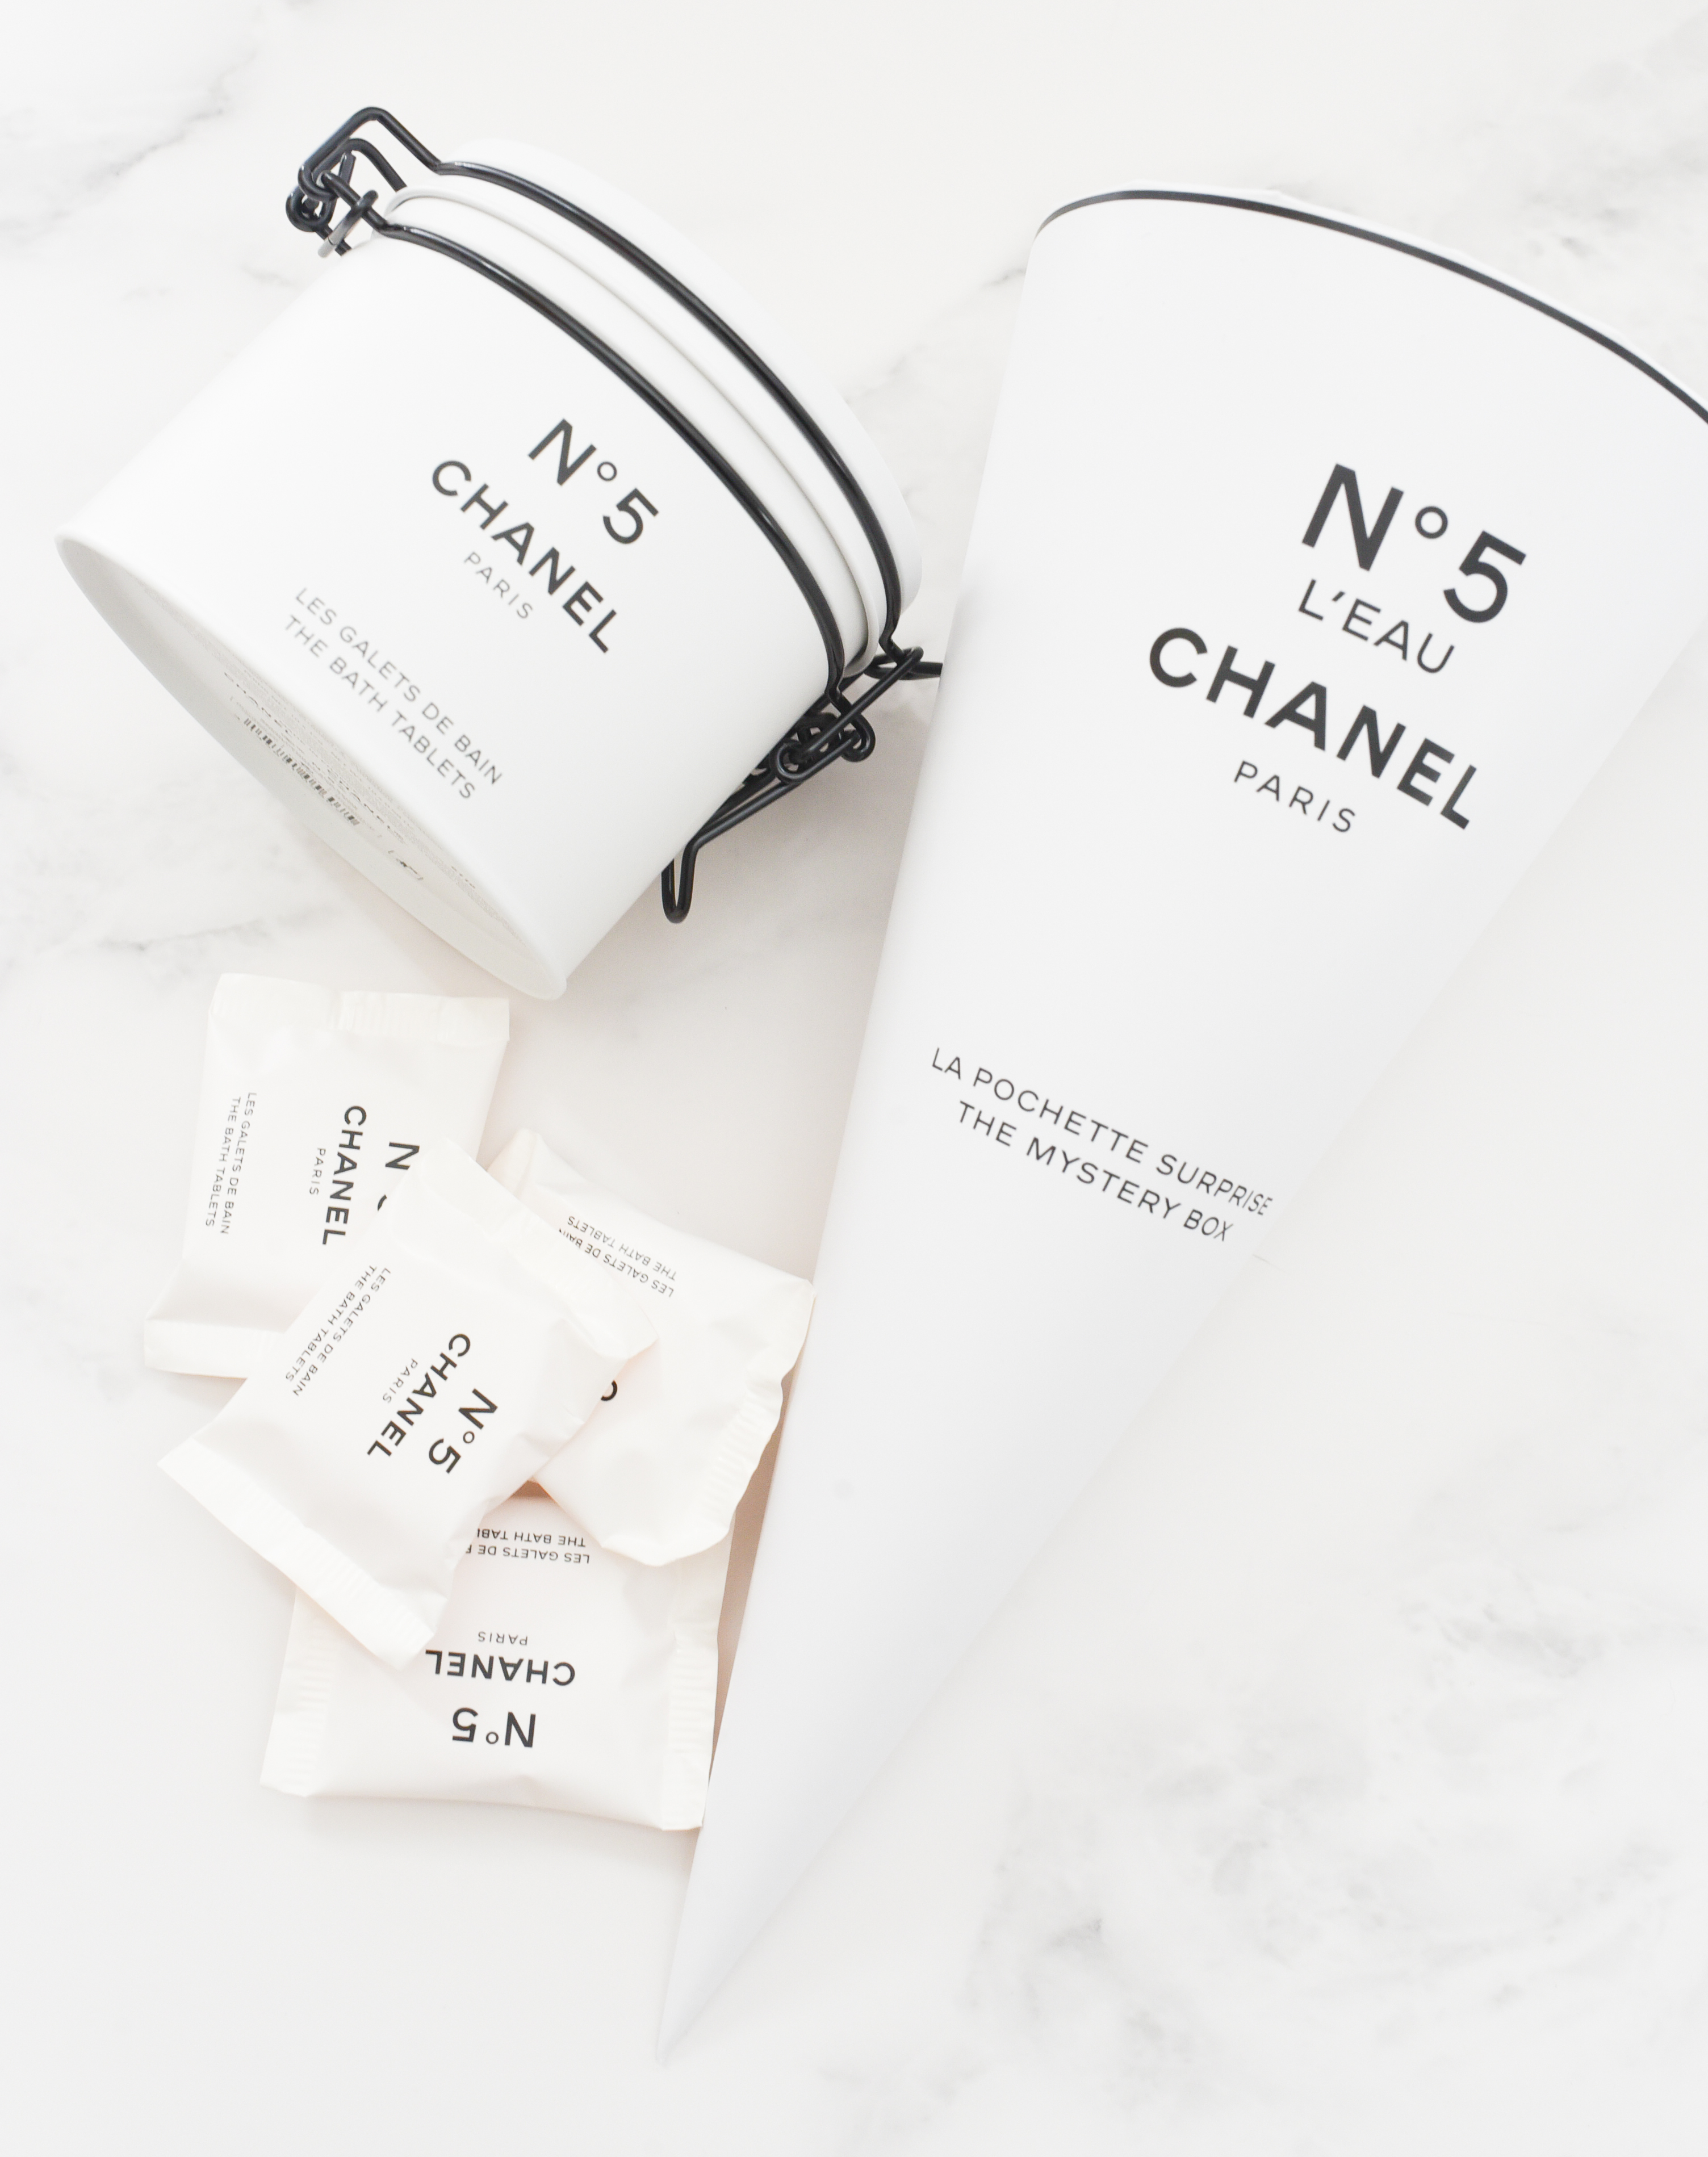 Chanel Factory 5 Bath Tablets Review With Photos